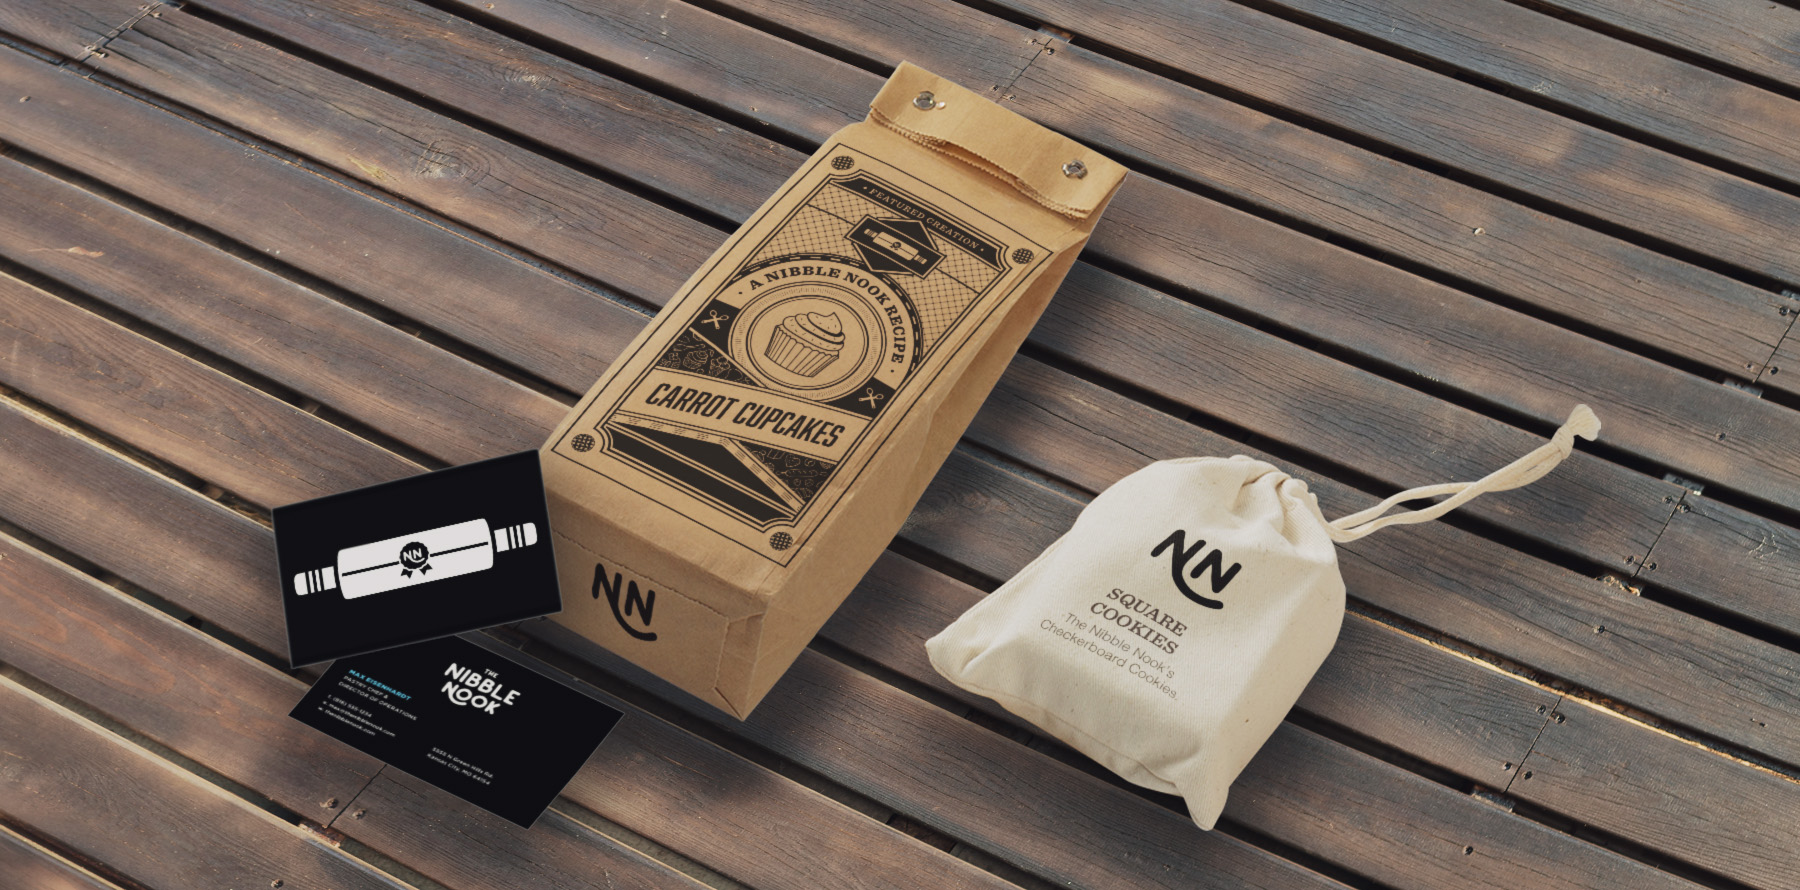 Product Branding Kansas City - The Nibble Nook